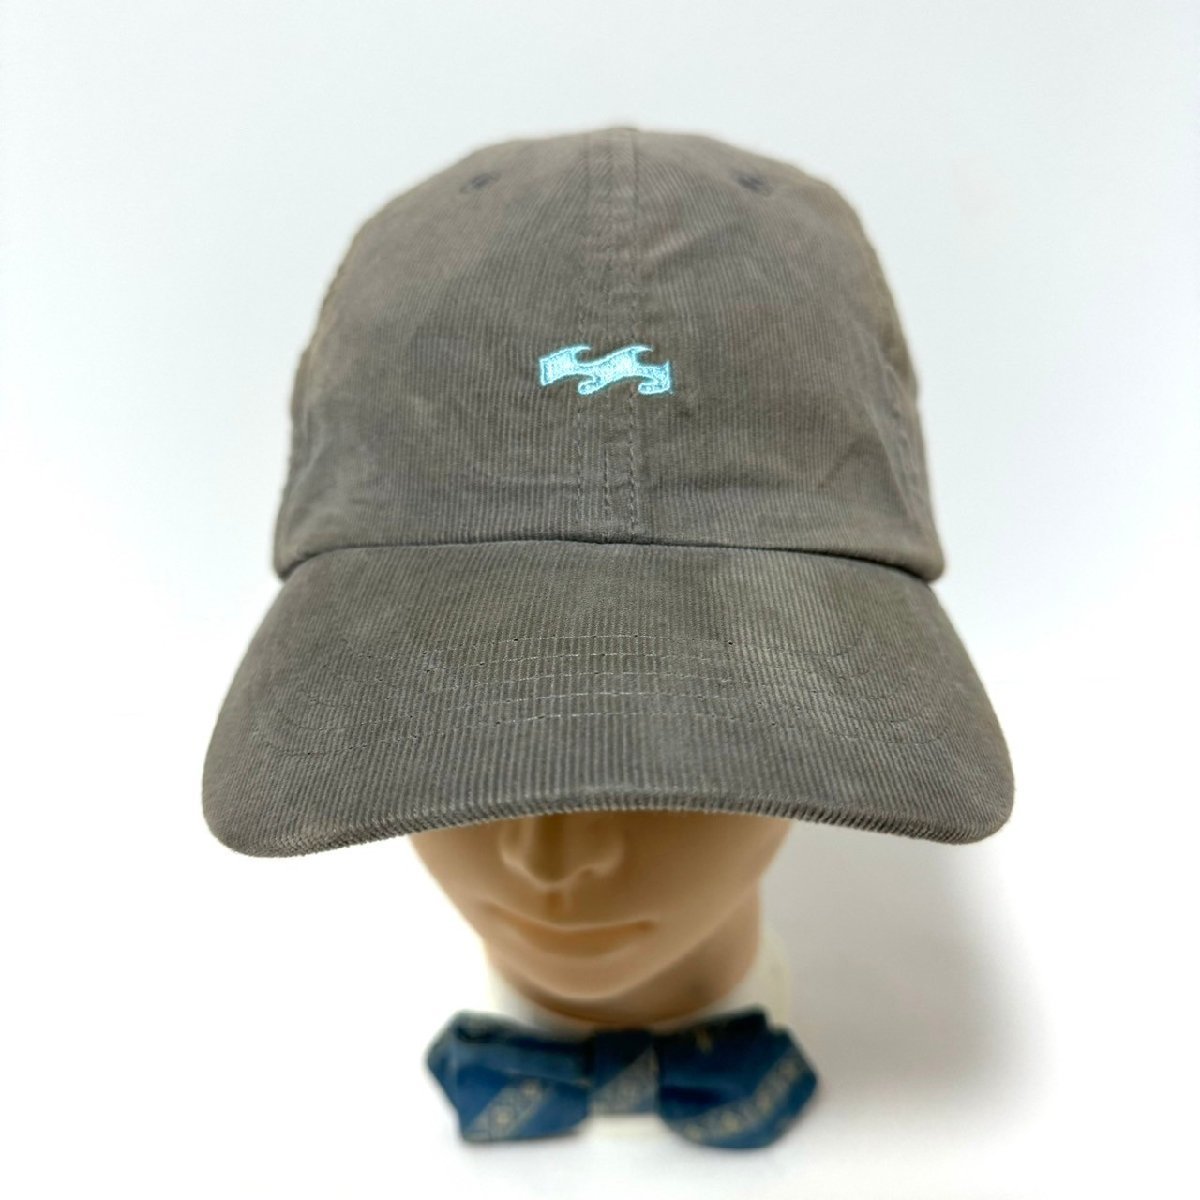 (^w^)b BILLABONG Billabong small . corduroy cap hat wave Logo embroidery surfing Surf casual g lable to adjustment possibility C0846EE